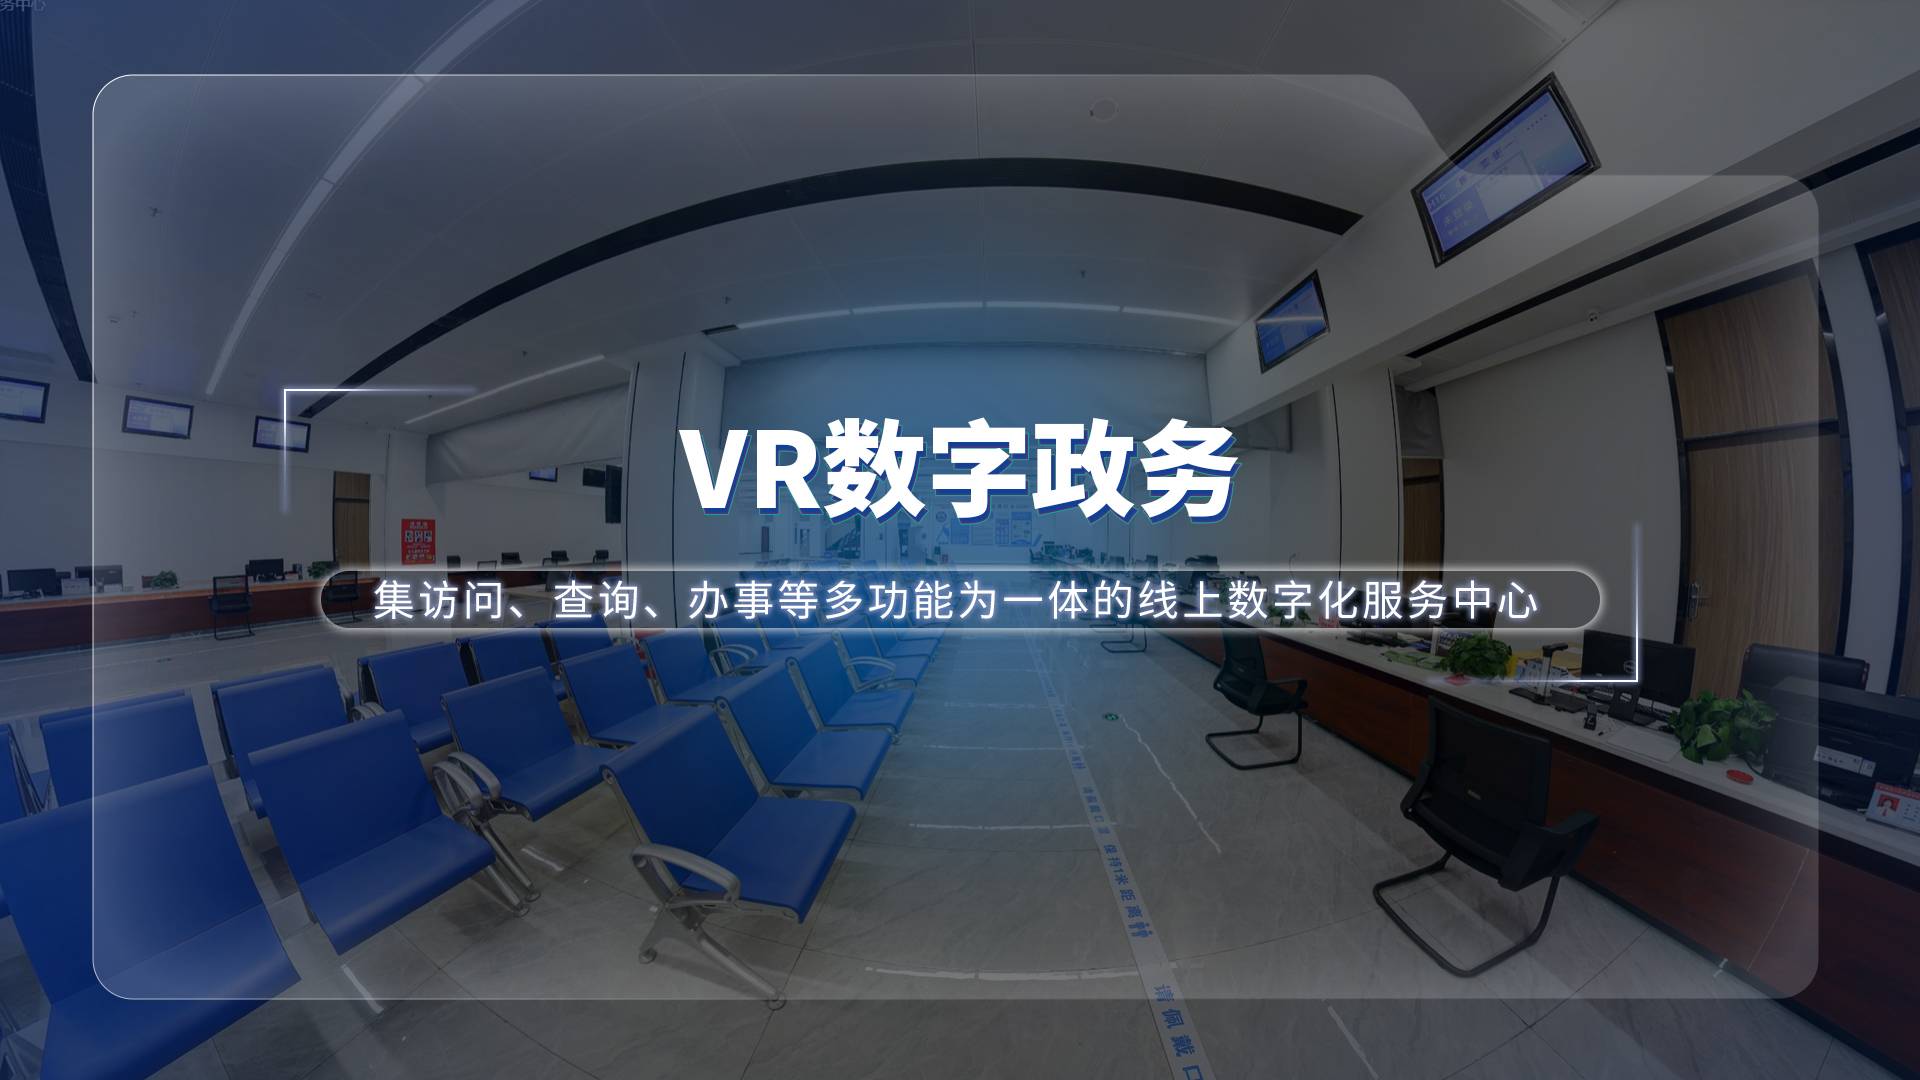 "Touch" with one click on your mobile phone! VR panoramic view helps digital upgrade of government service hall